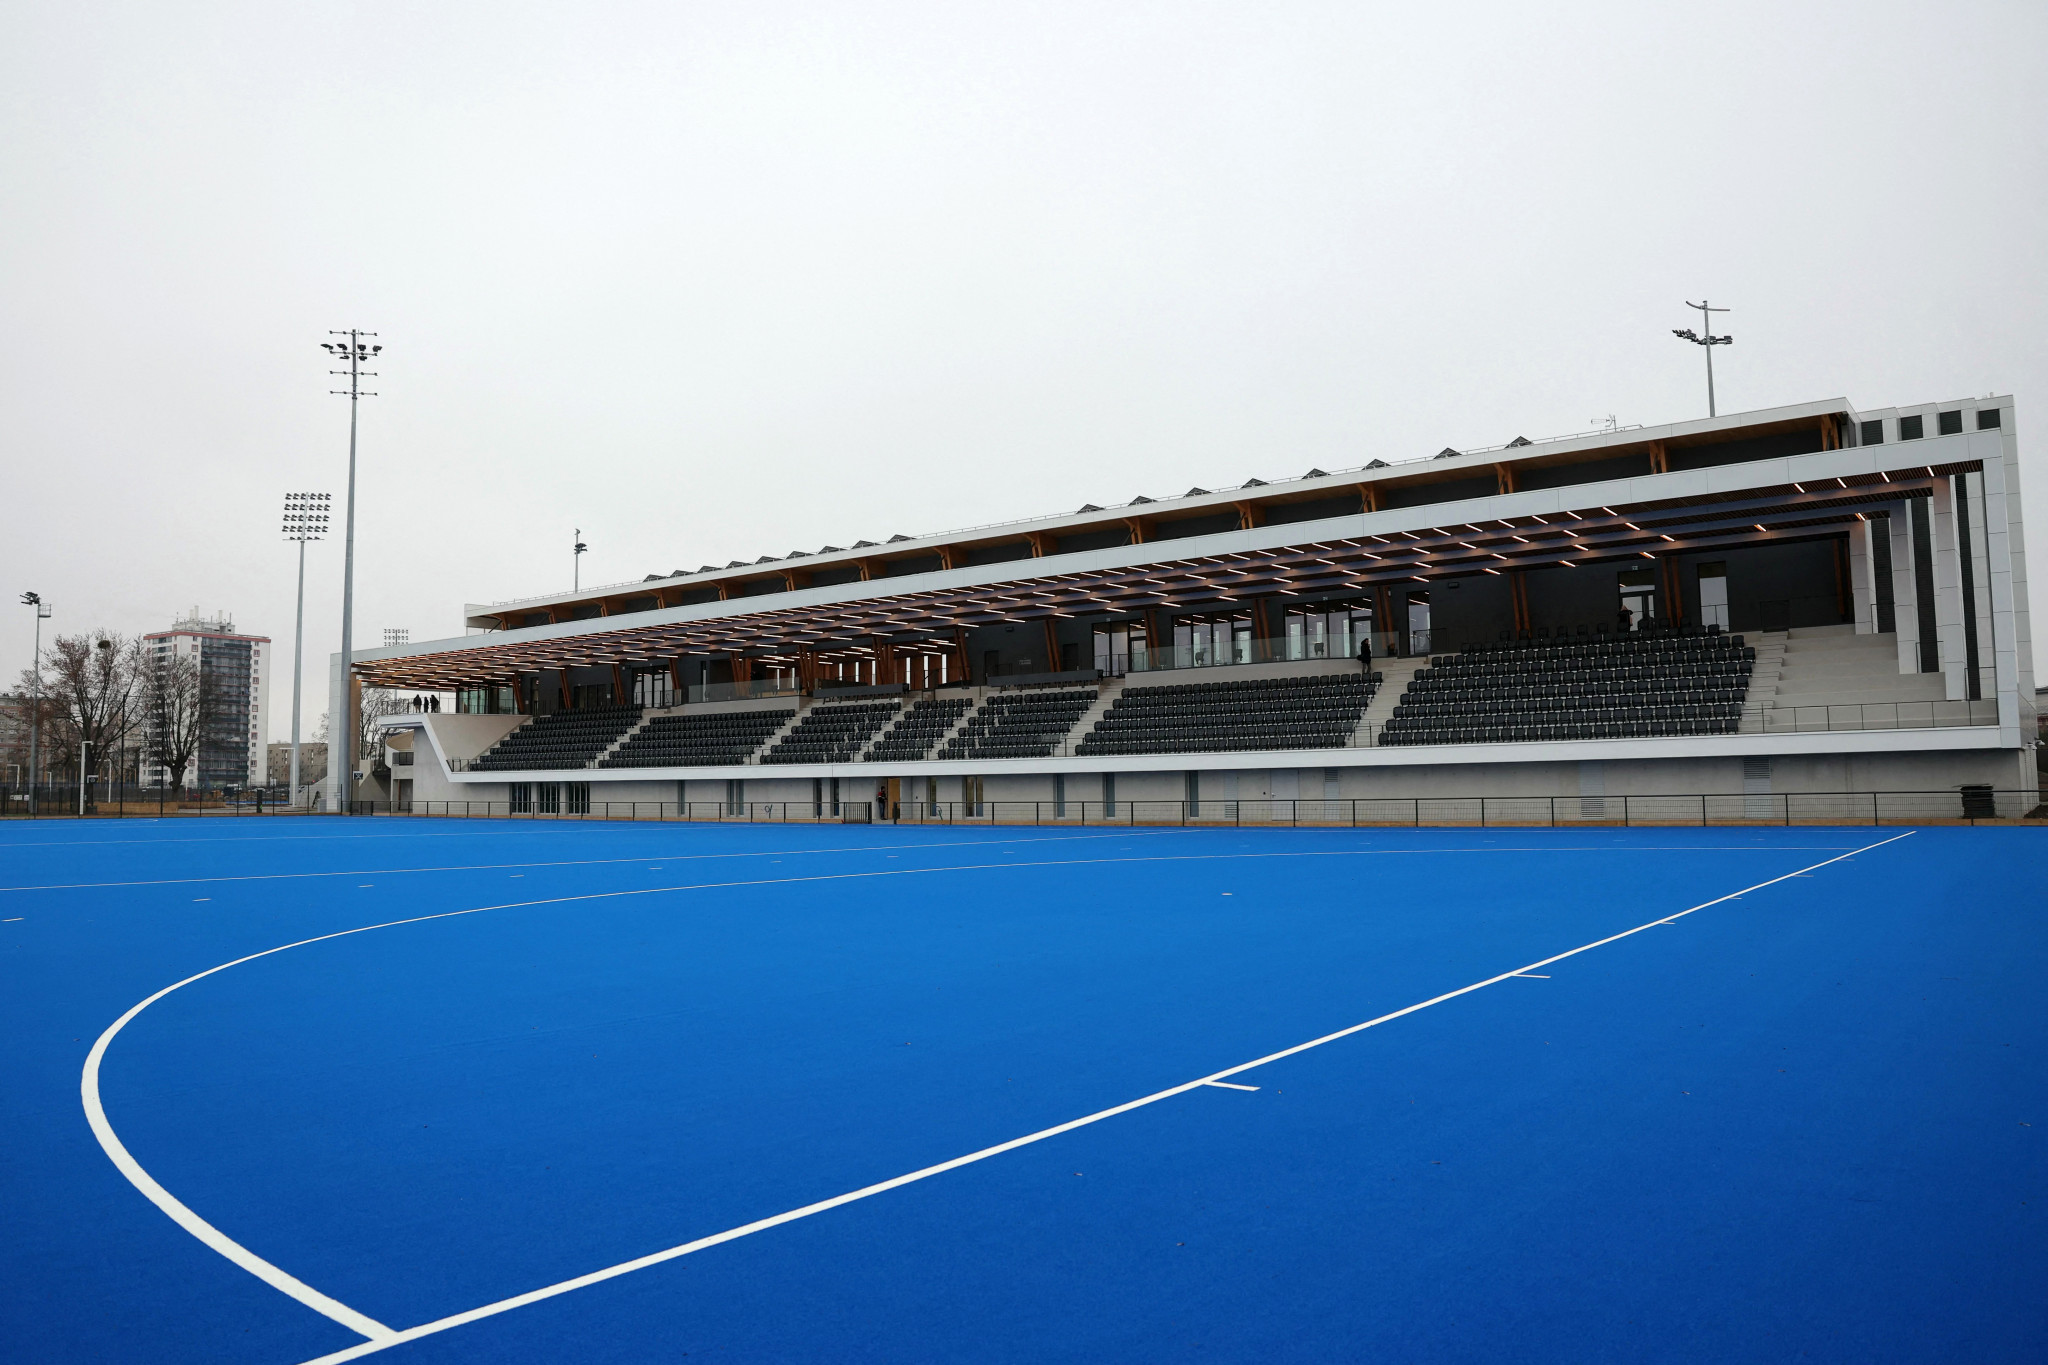 Yves-du-Manoir stadium one of the venue for Olympic Games 2024, after being modernised. Getty Images
